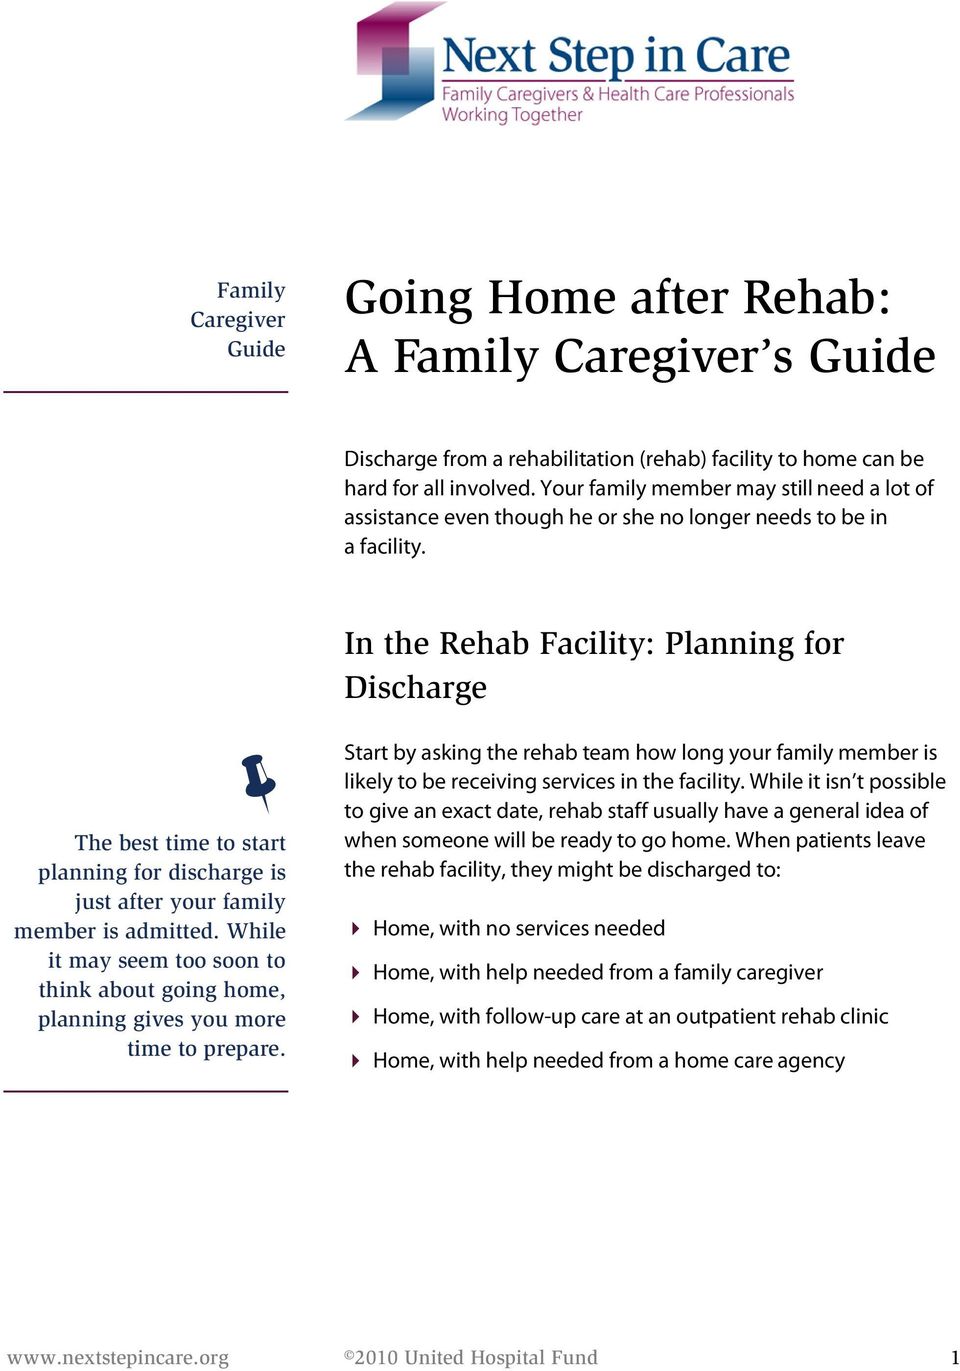 " The best time to start planning for discharge is just after your family member is admitted. While it may seem too soon to think about going home, planning gives you more time to prepare.